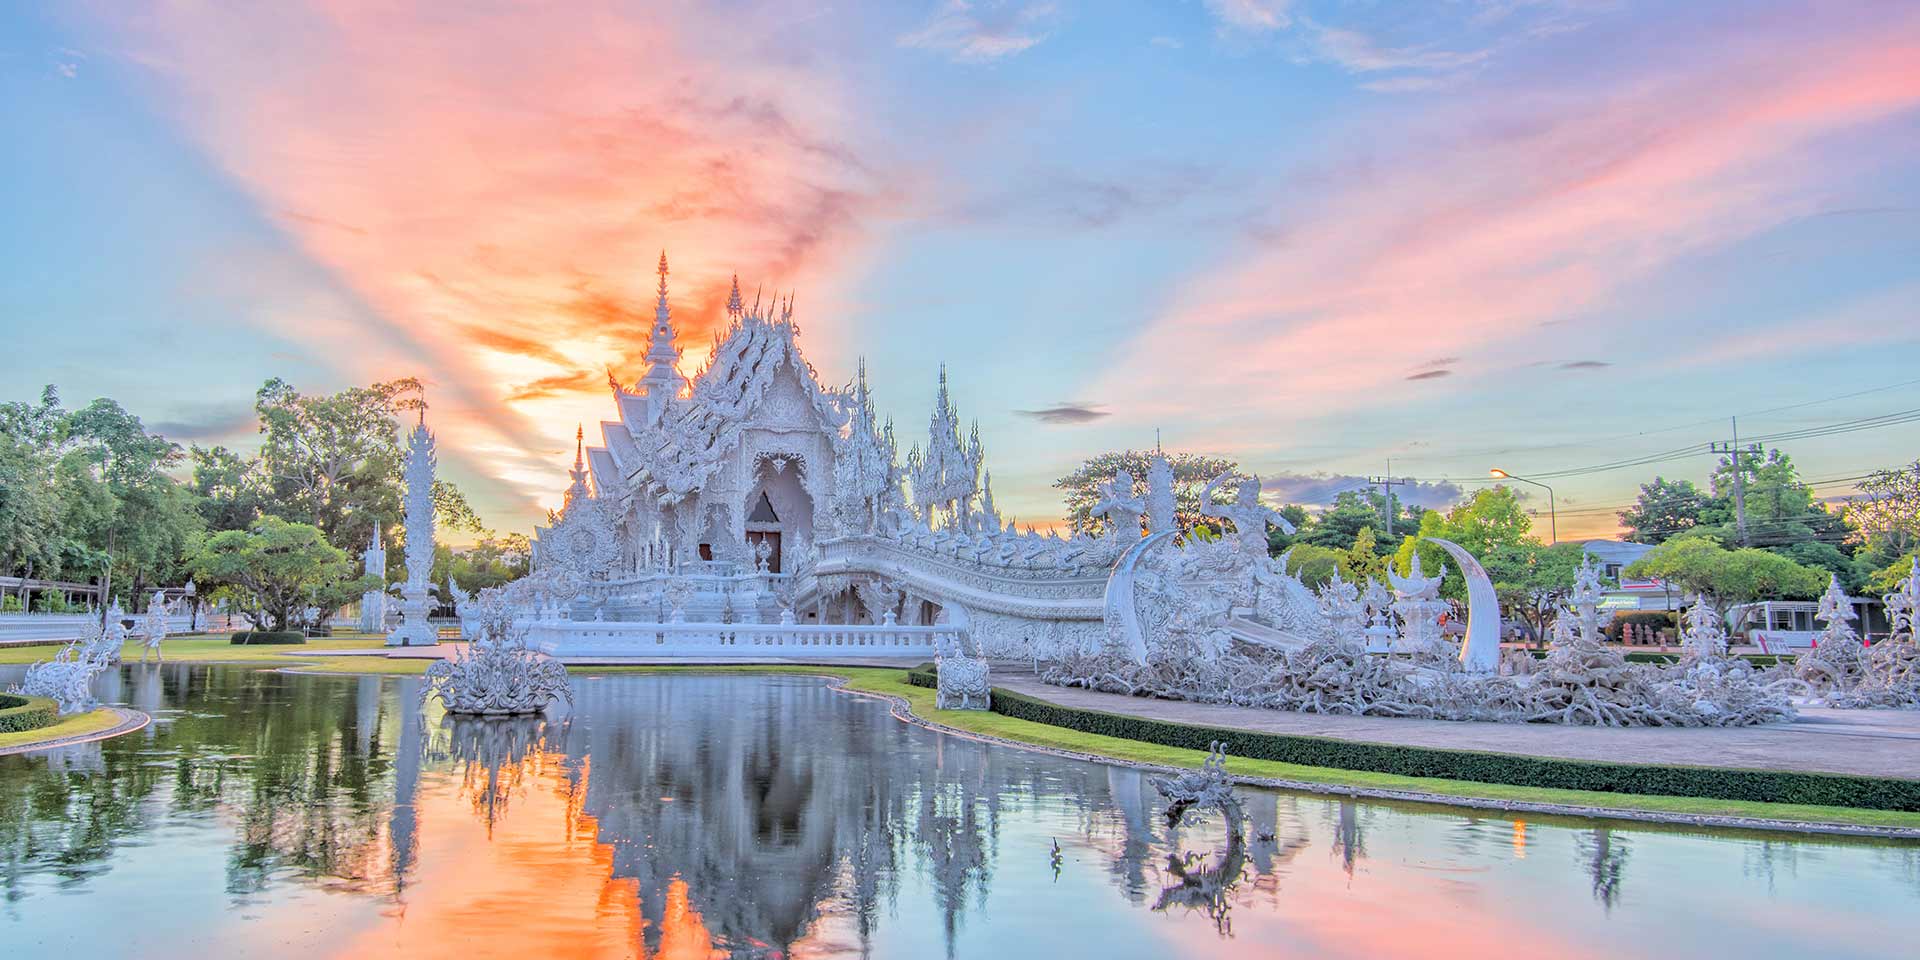 wat rong khun temple in thailand at sunset